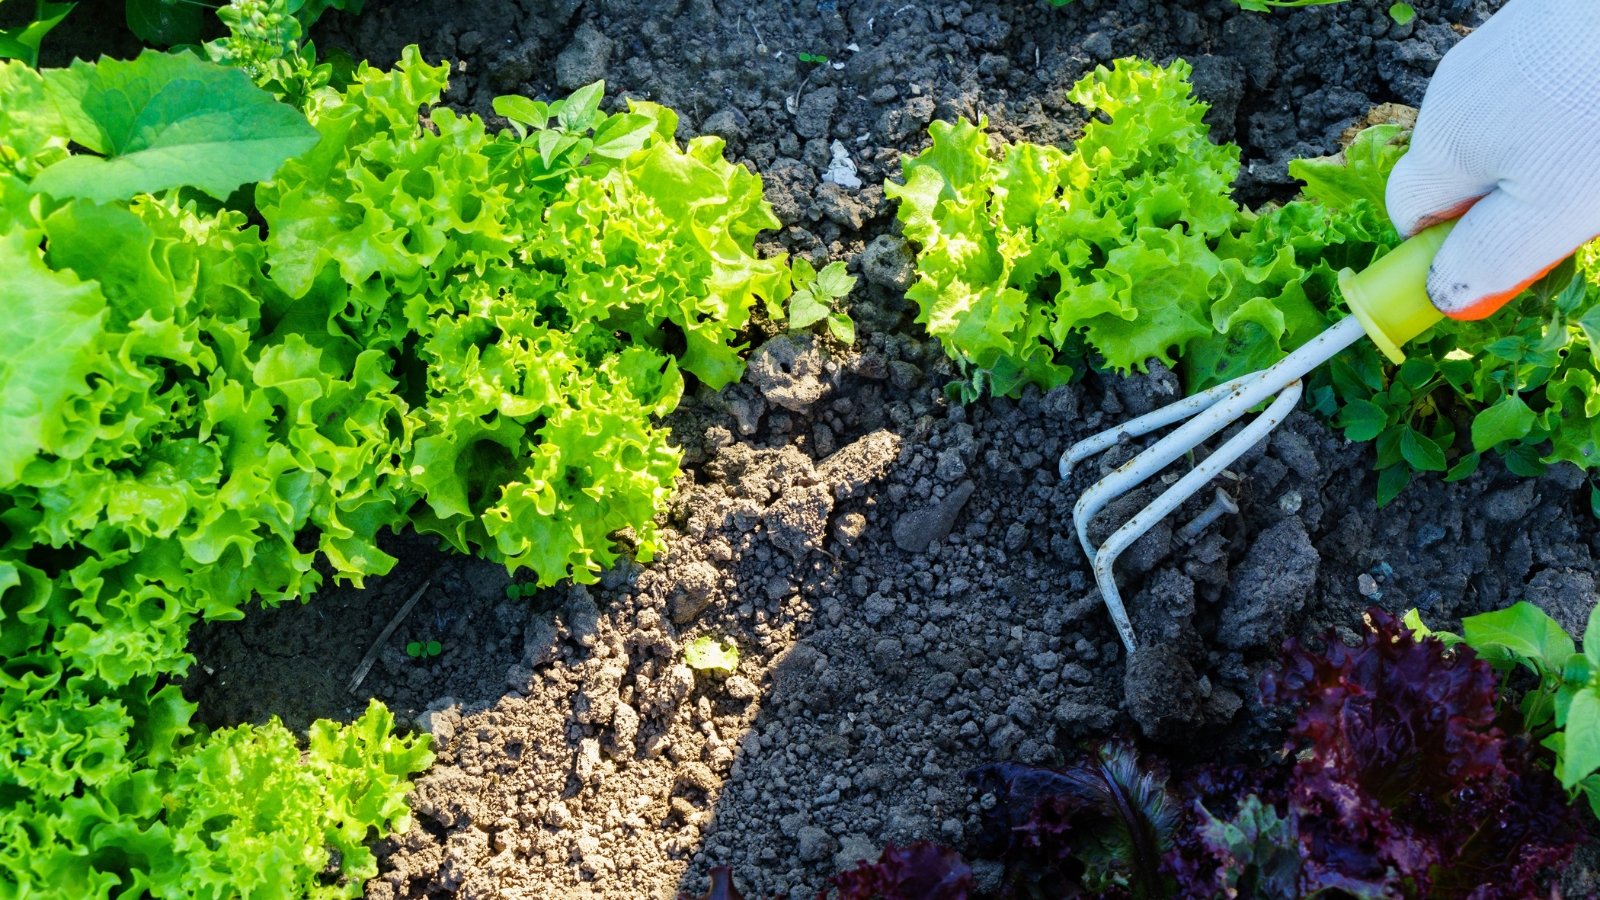 A white-gloved hand delicately wields a gardening fork, carefully tending to a garden bed filled with vibrant lettuces, ensuring they thrive in their verdant sanctuary.